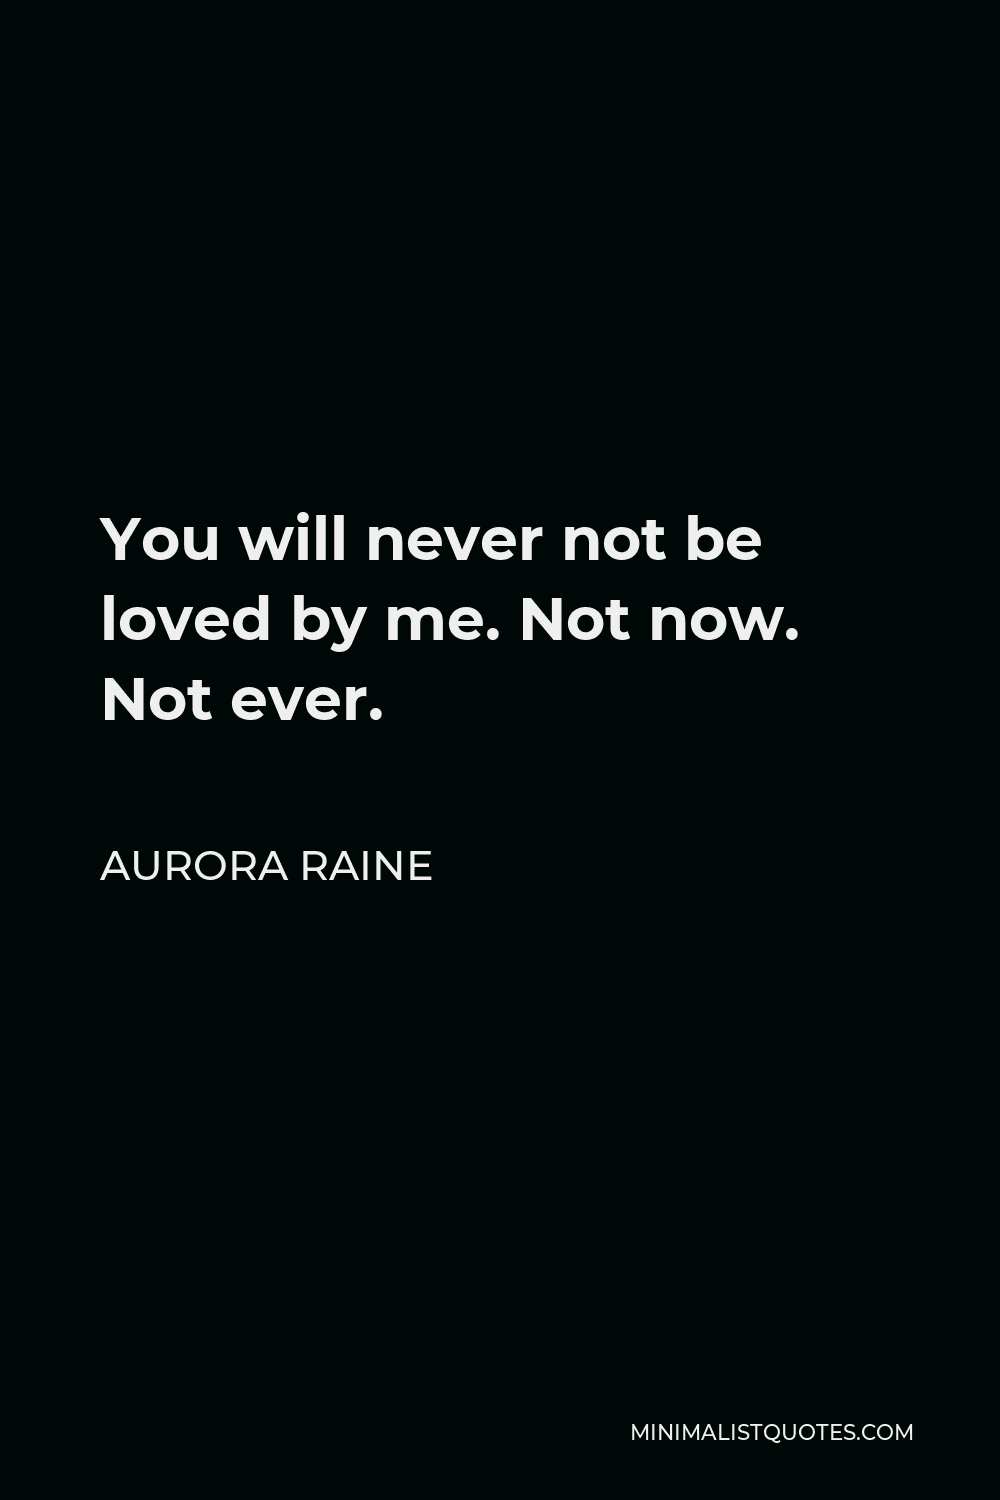 Aurora Raine Quote - You will never not be loved by me. Not now. Not ever.